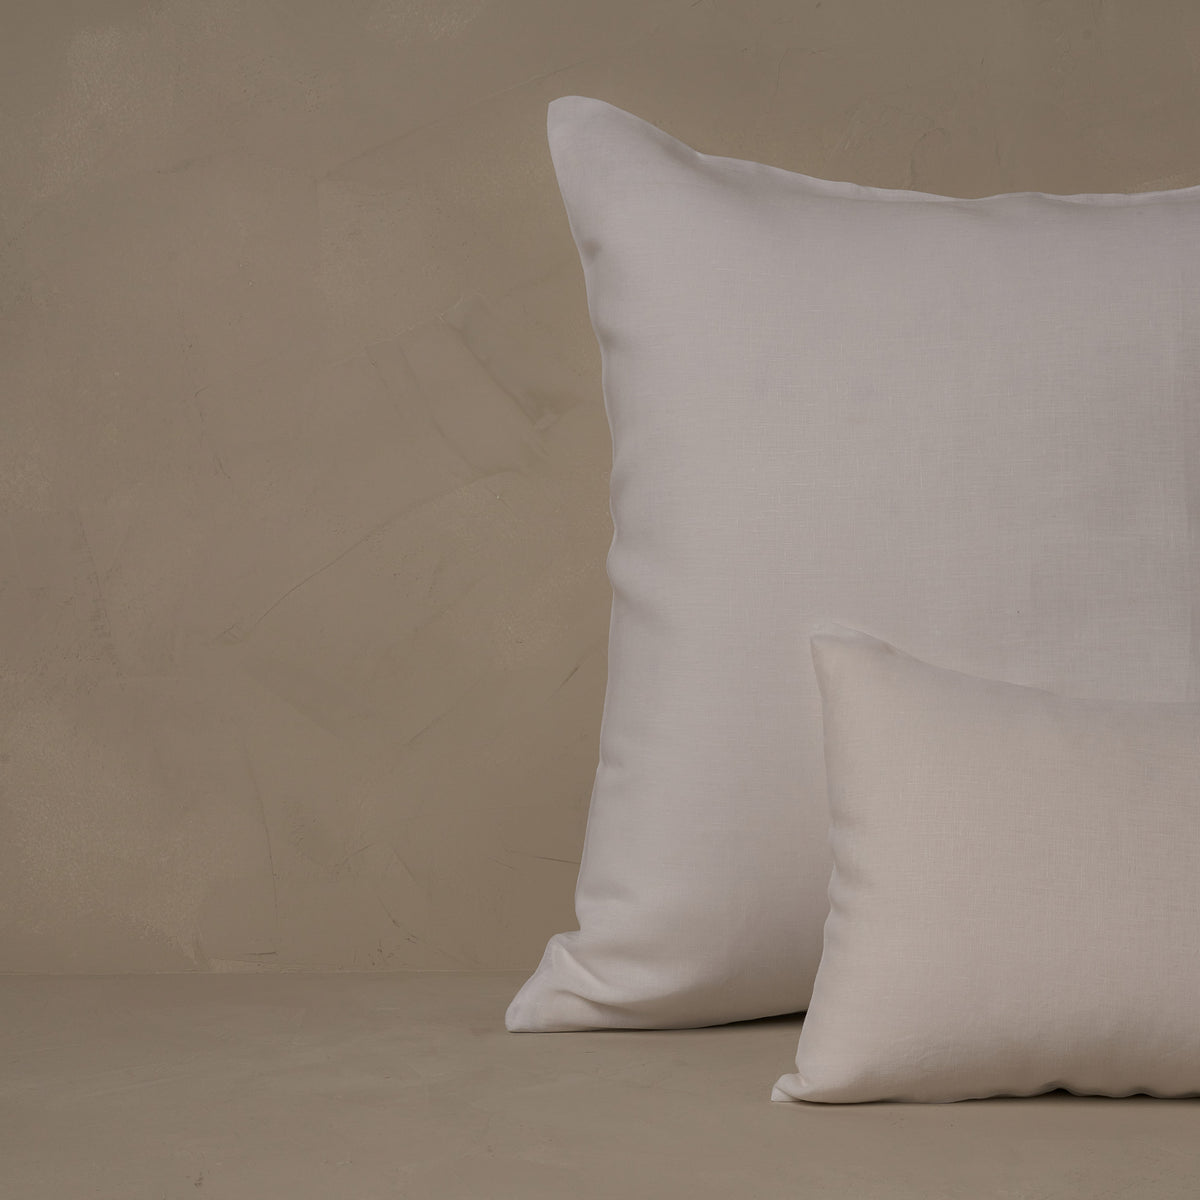 An image of a small boudoir or travel size pillow stacked in front of a large euro size pillow. The pillow cases are made in Italy of breathable and relaxed 100% linen, LETTO Lino Primo in color white. data-image-id=